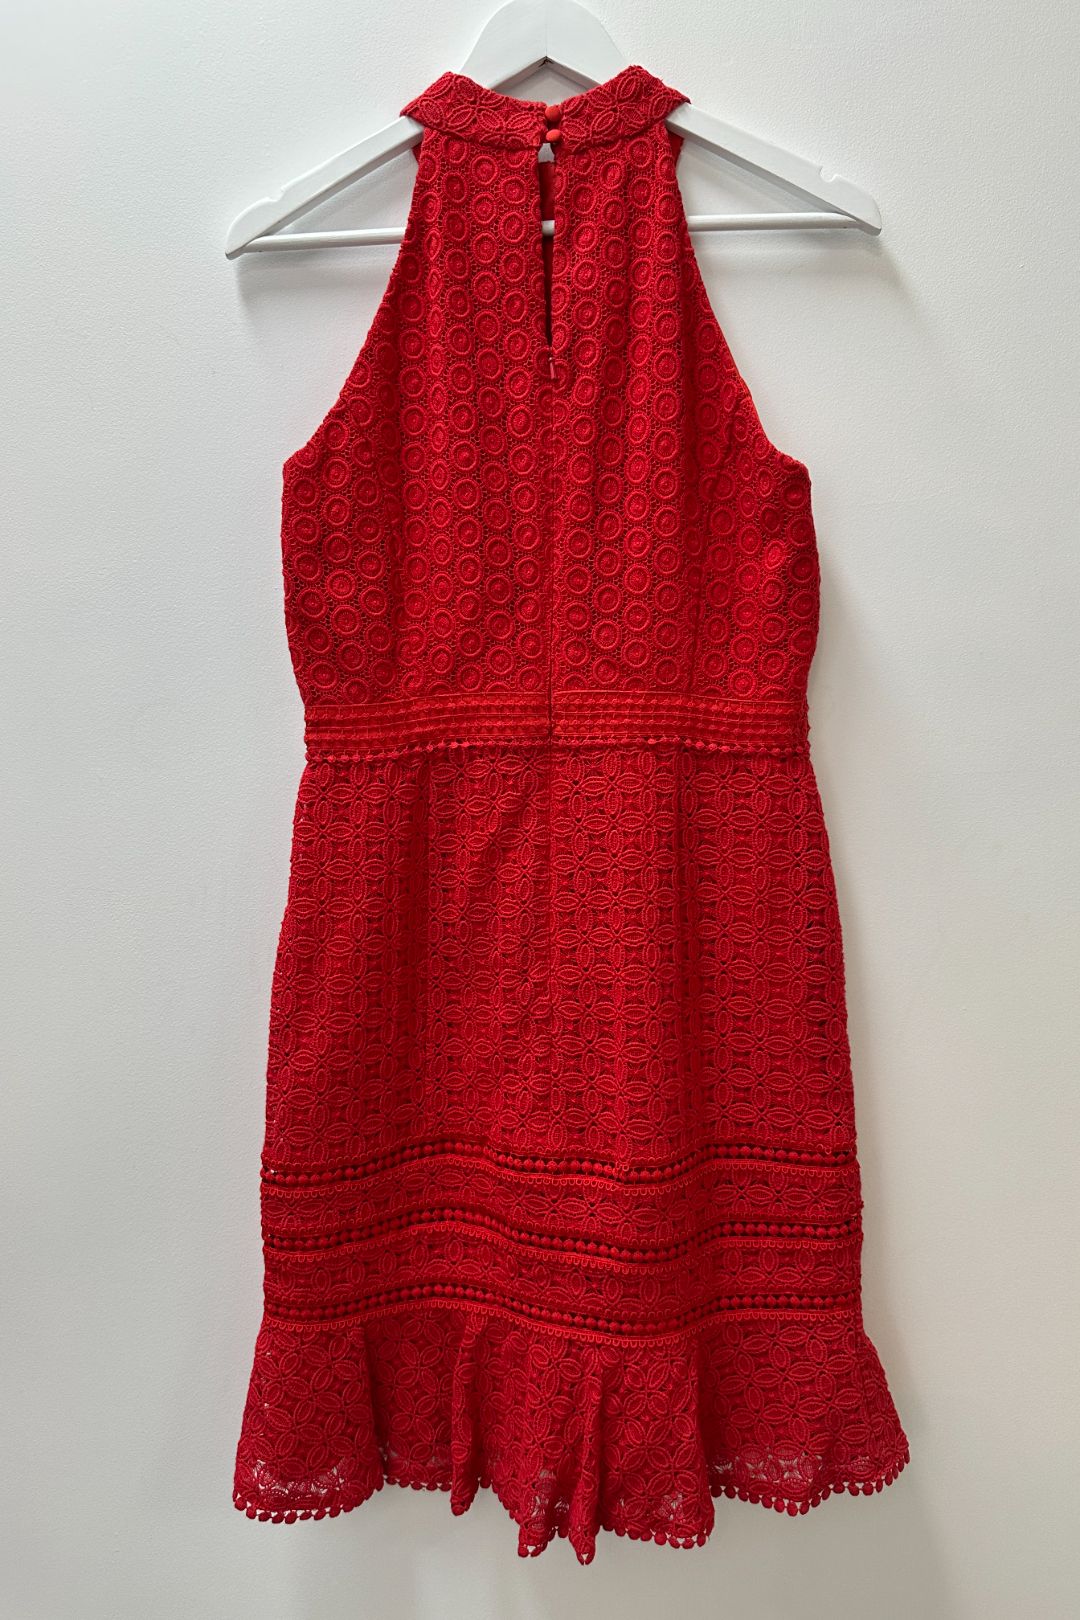 Review Red Sleeveless Lace Dress